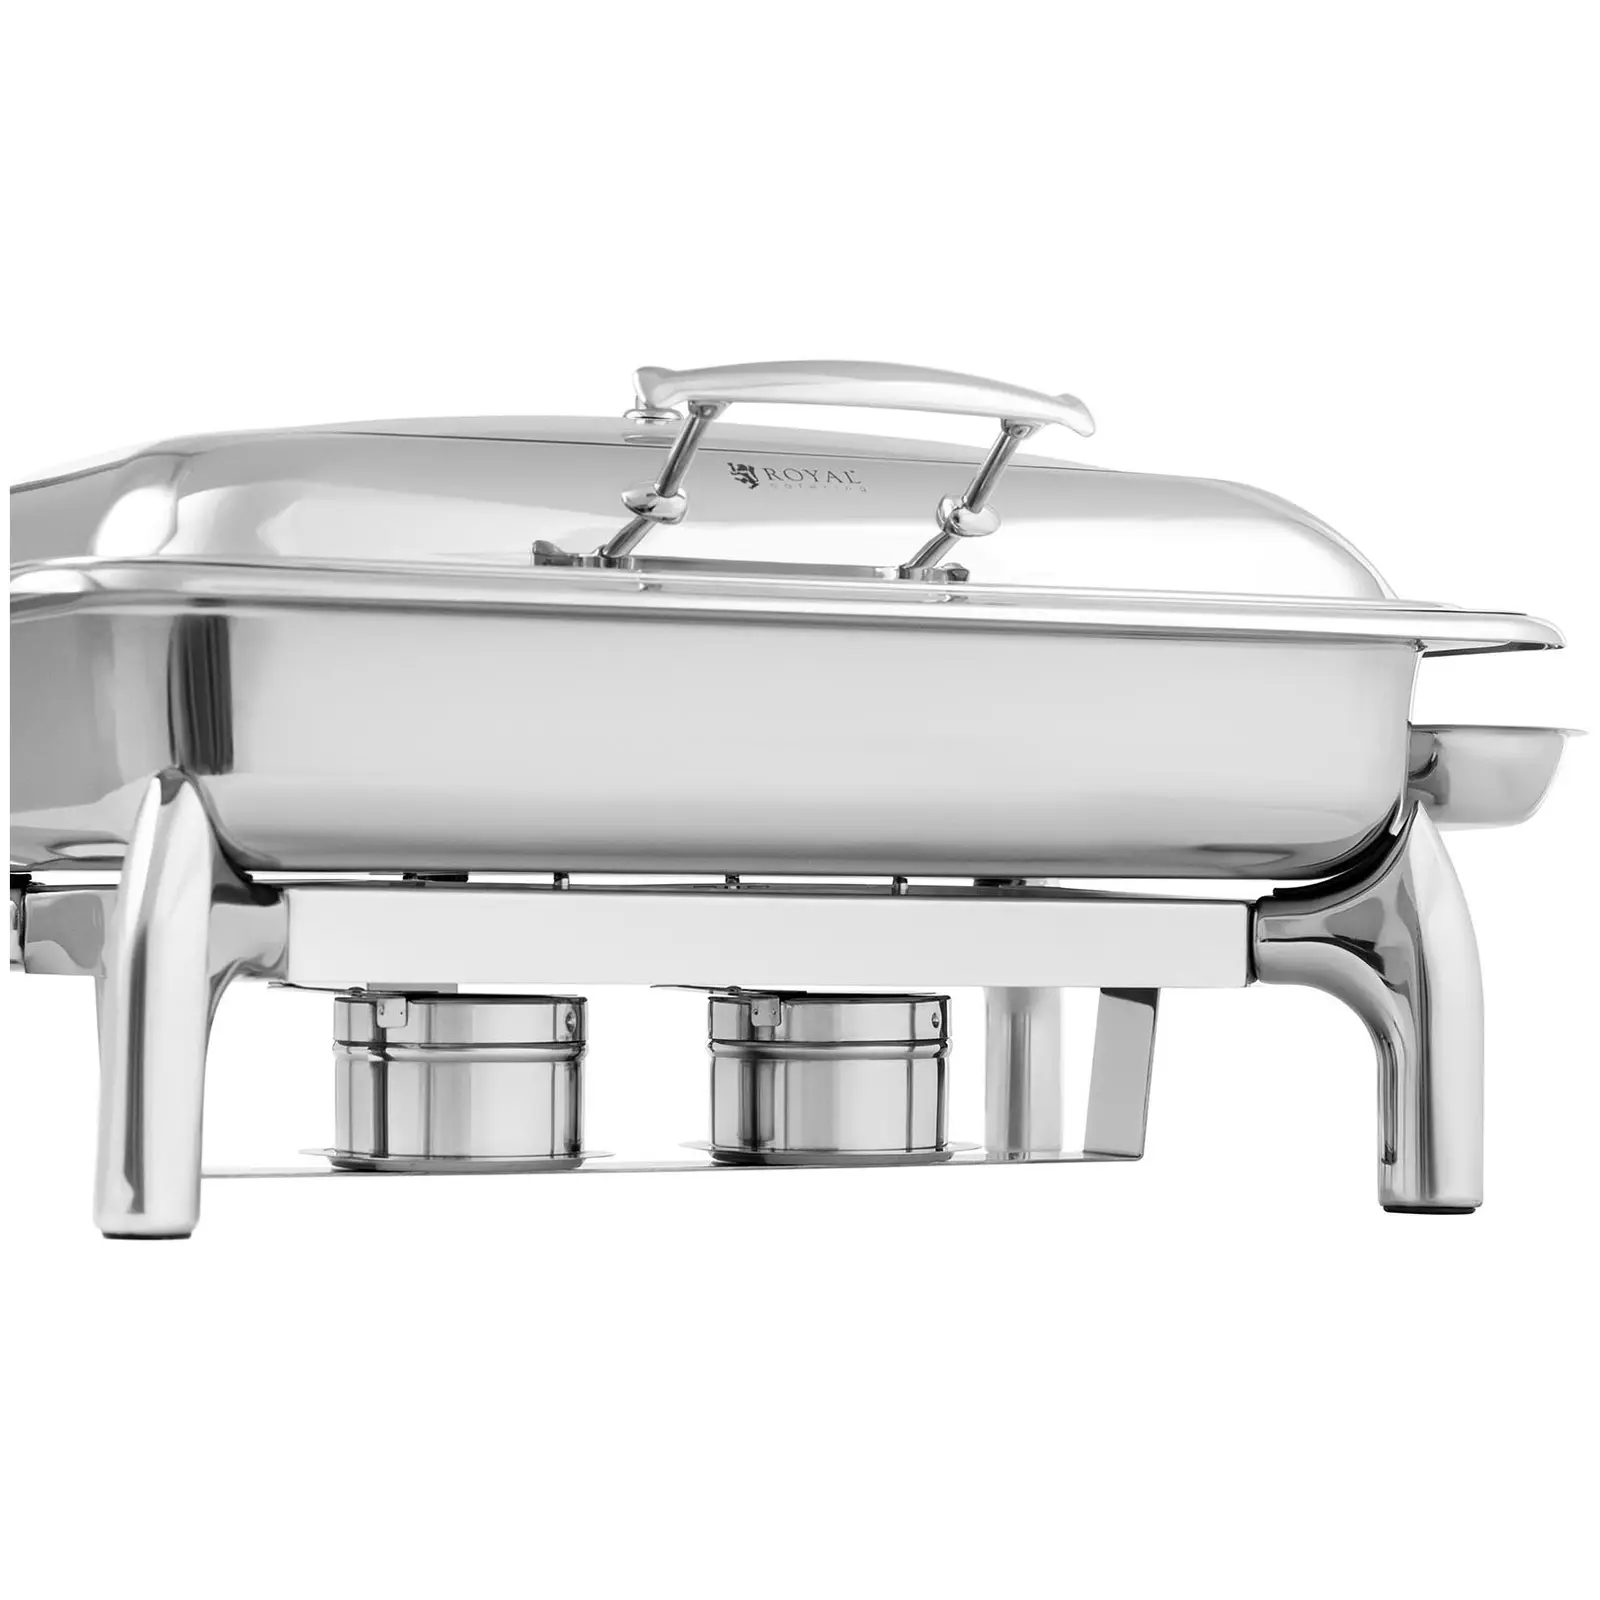 Chafing dish - GN 1/1 - Royal Catering - 8,5 L - 2 bränsleceller